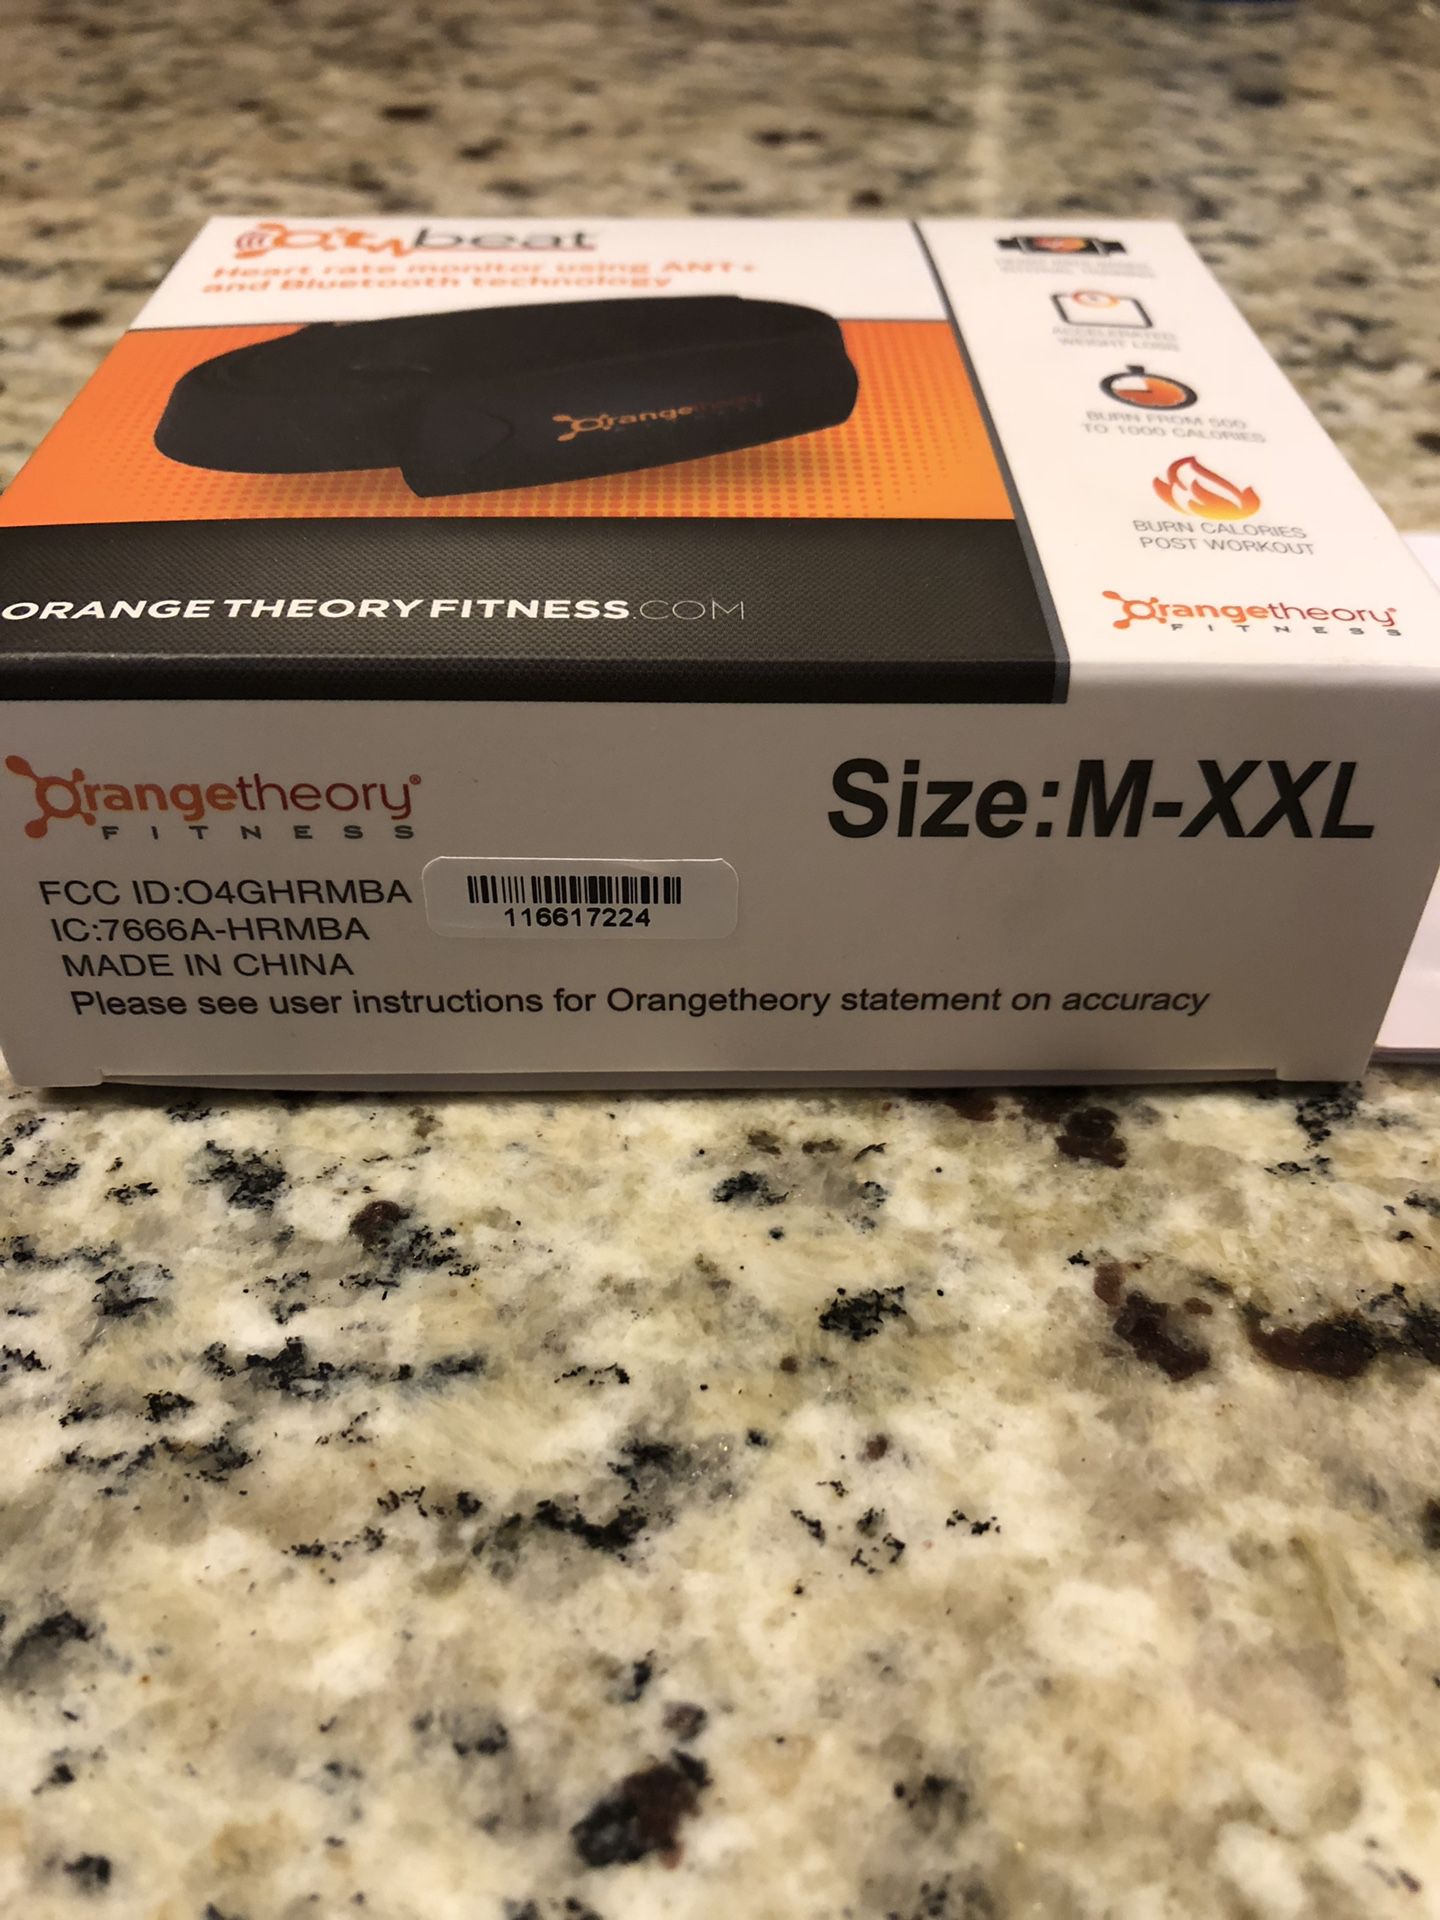 Orange theory chest heart rate monitor for Sale in Albuquerque, NM